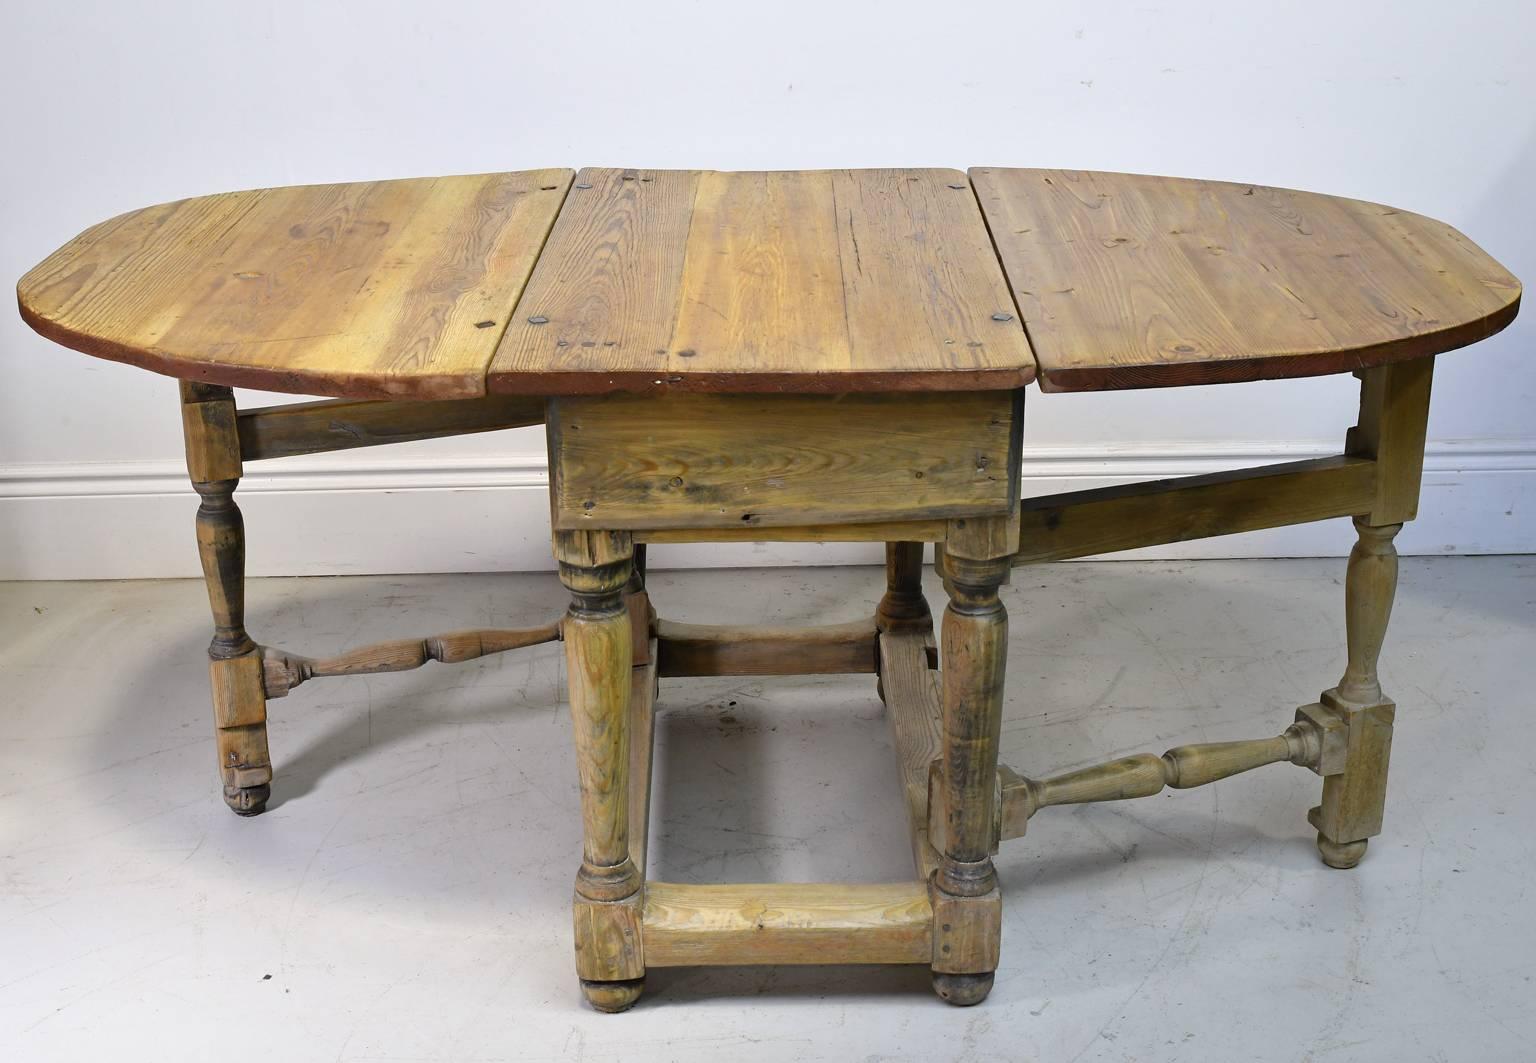 A large, rustic baroque farmhouse table with drop-leaves and gate-leg construction from Norway, circa 1740. The top is made of kiefer pine and the base is of white pine. A versatile table that is compact when closed, and expands into a larger table